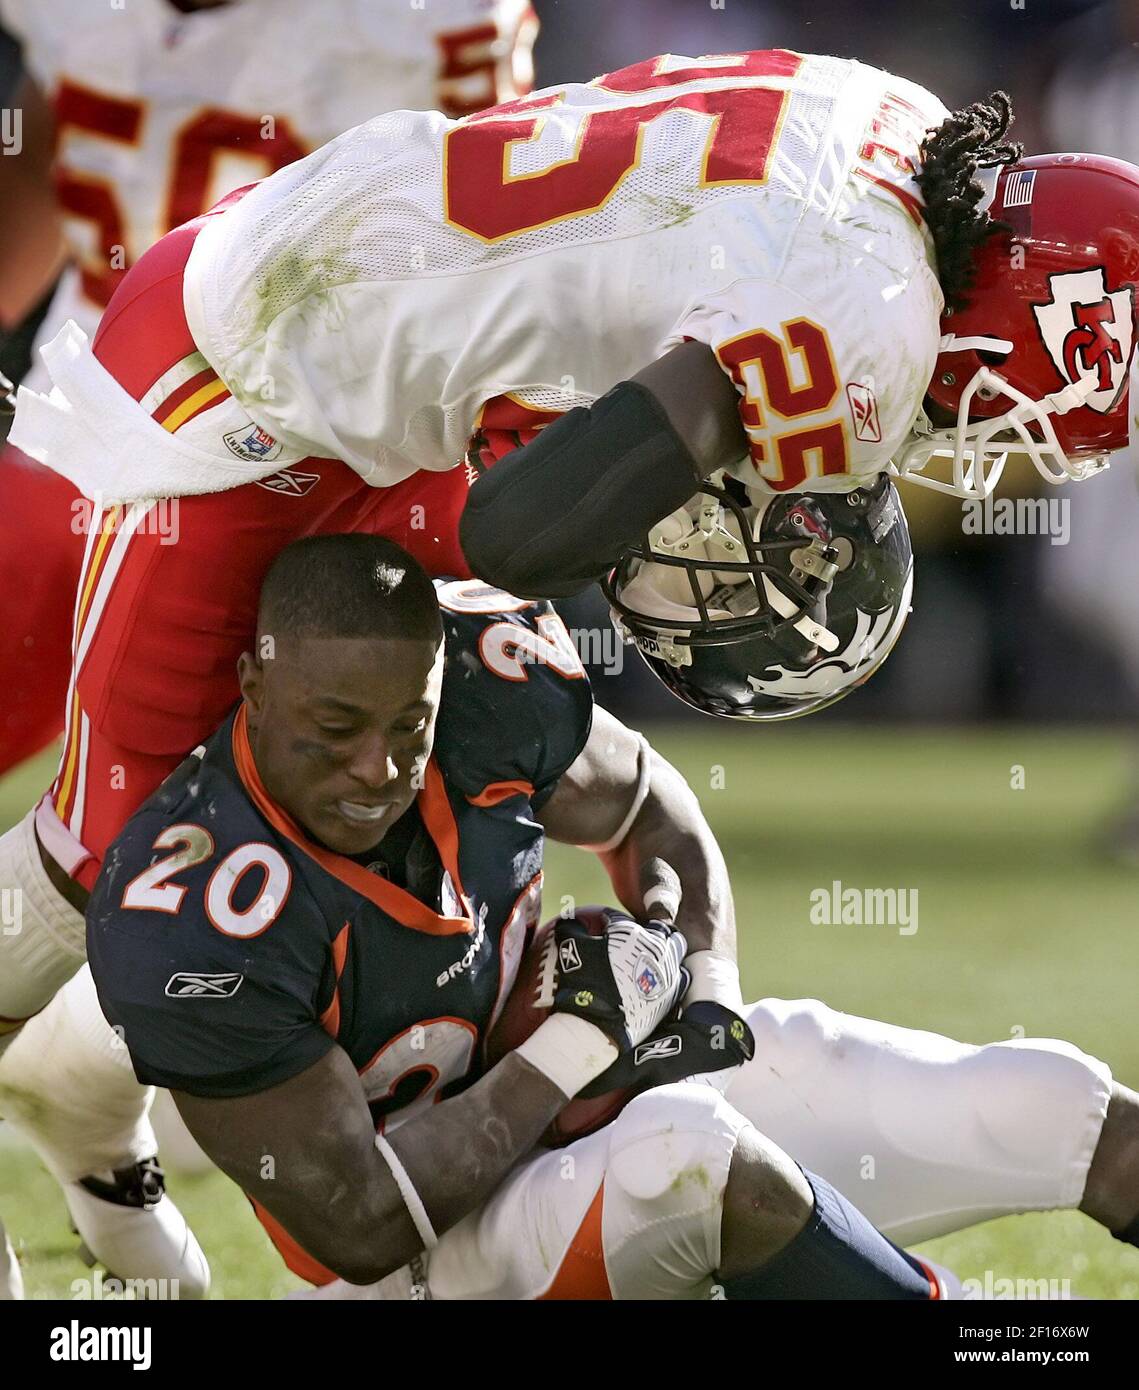 Kansas City Chiefs safety Greg Wesley tore the helmet off of Denver Broncos  running back Mike Bell in the fourth quarter at Invesco Field at Mile High  in Denver, Colorado, Sunday, September